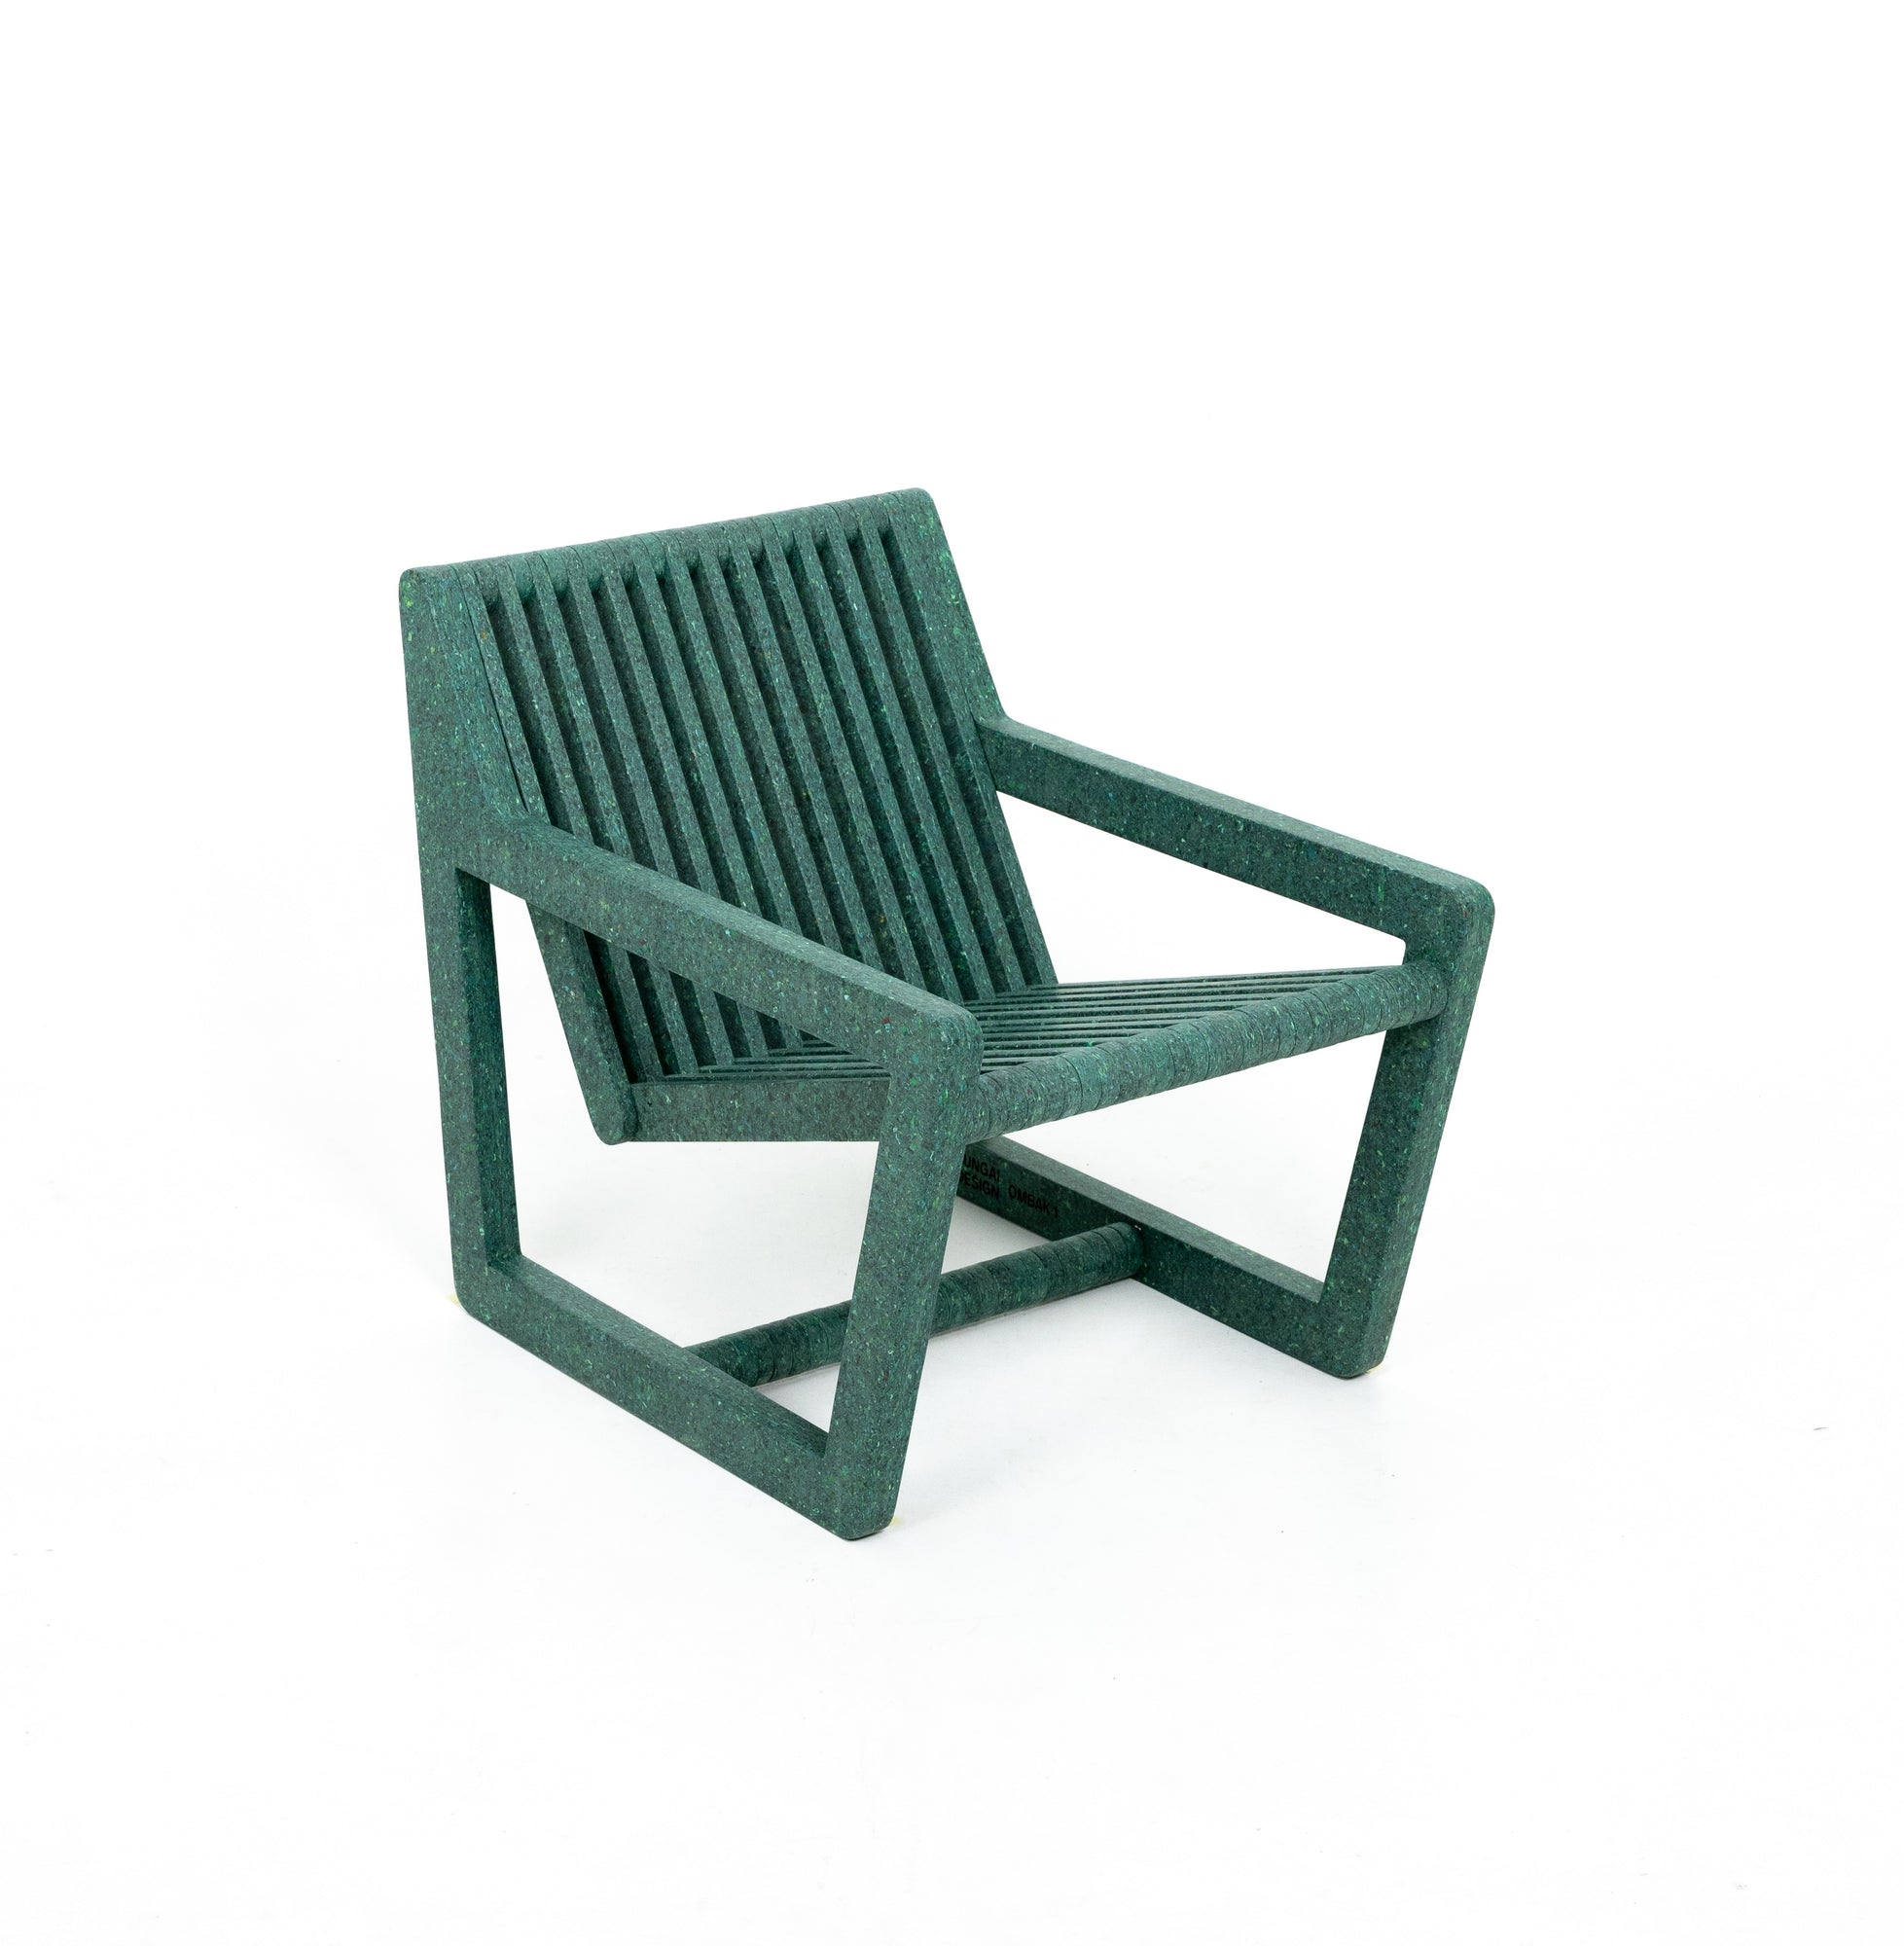 Ombak Lounger Coral Green